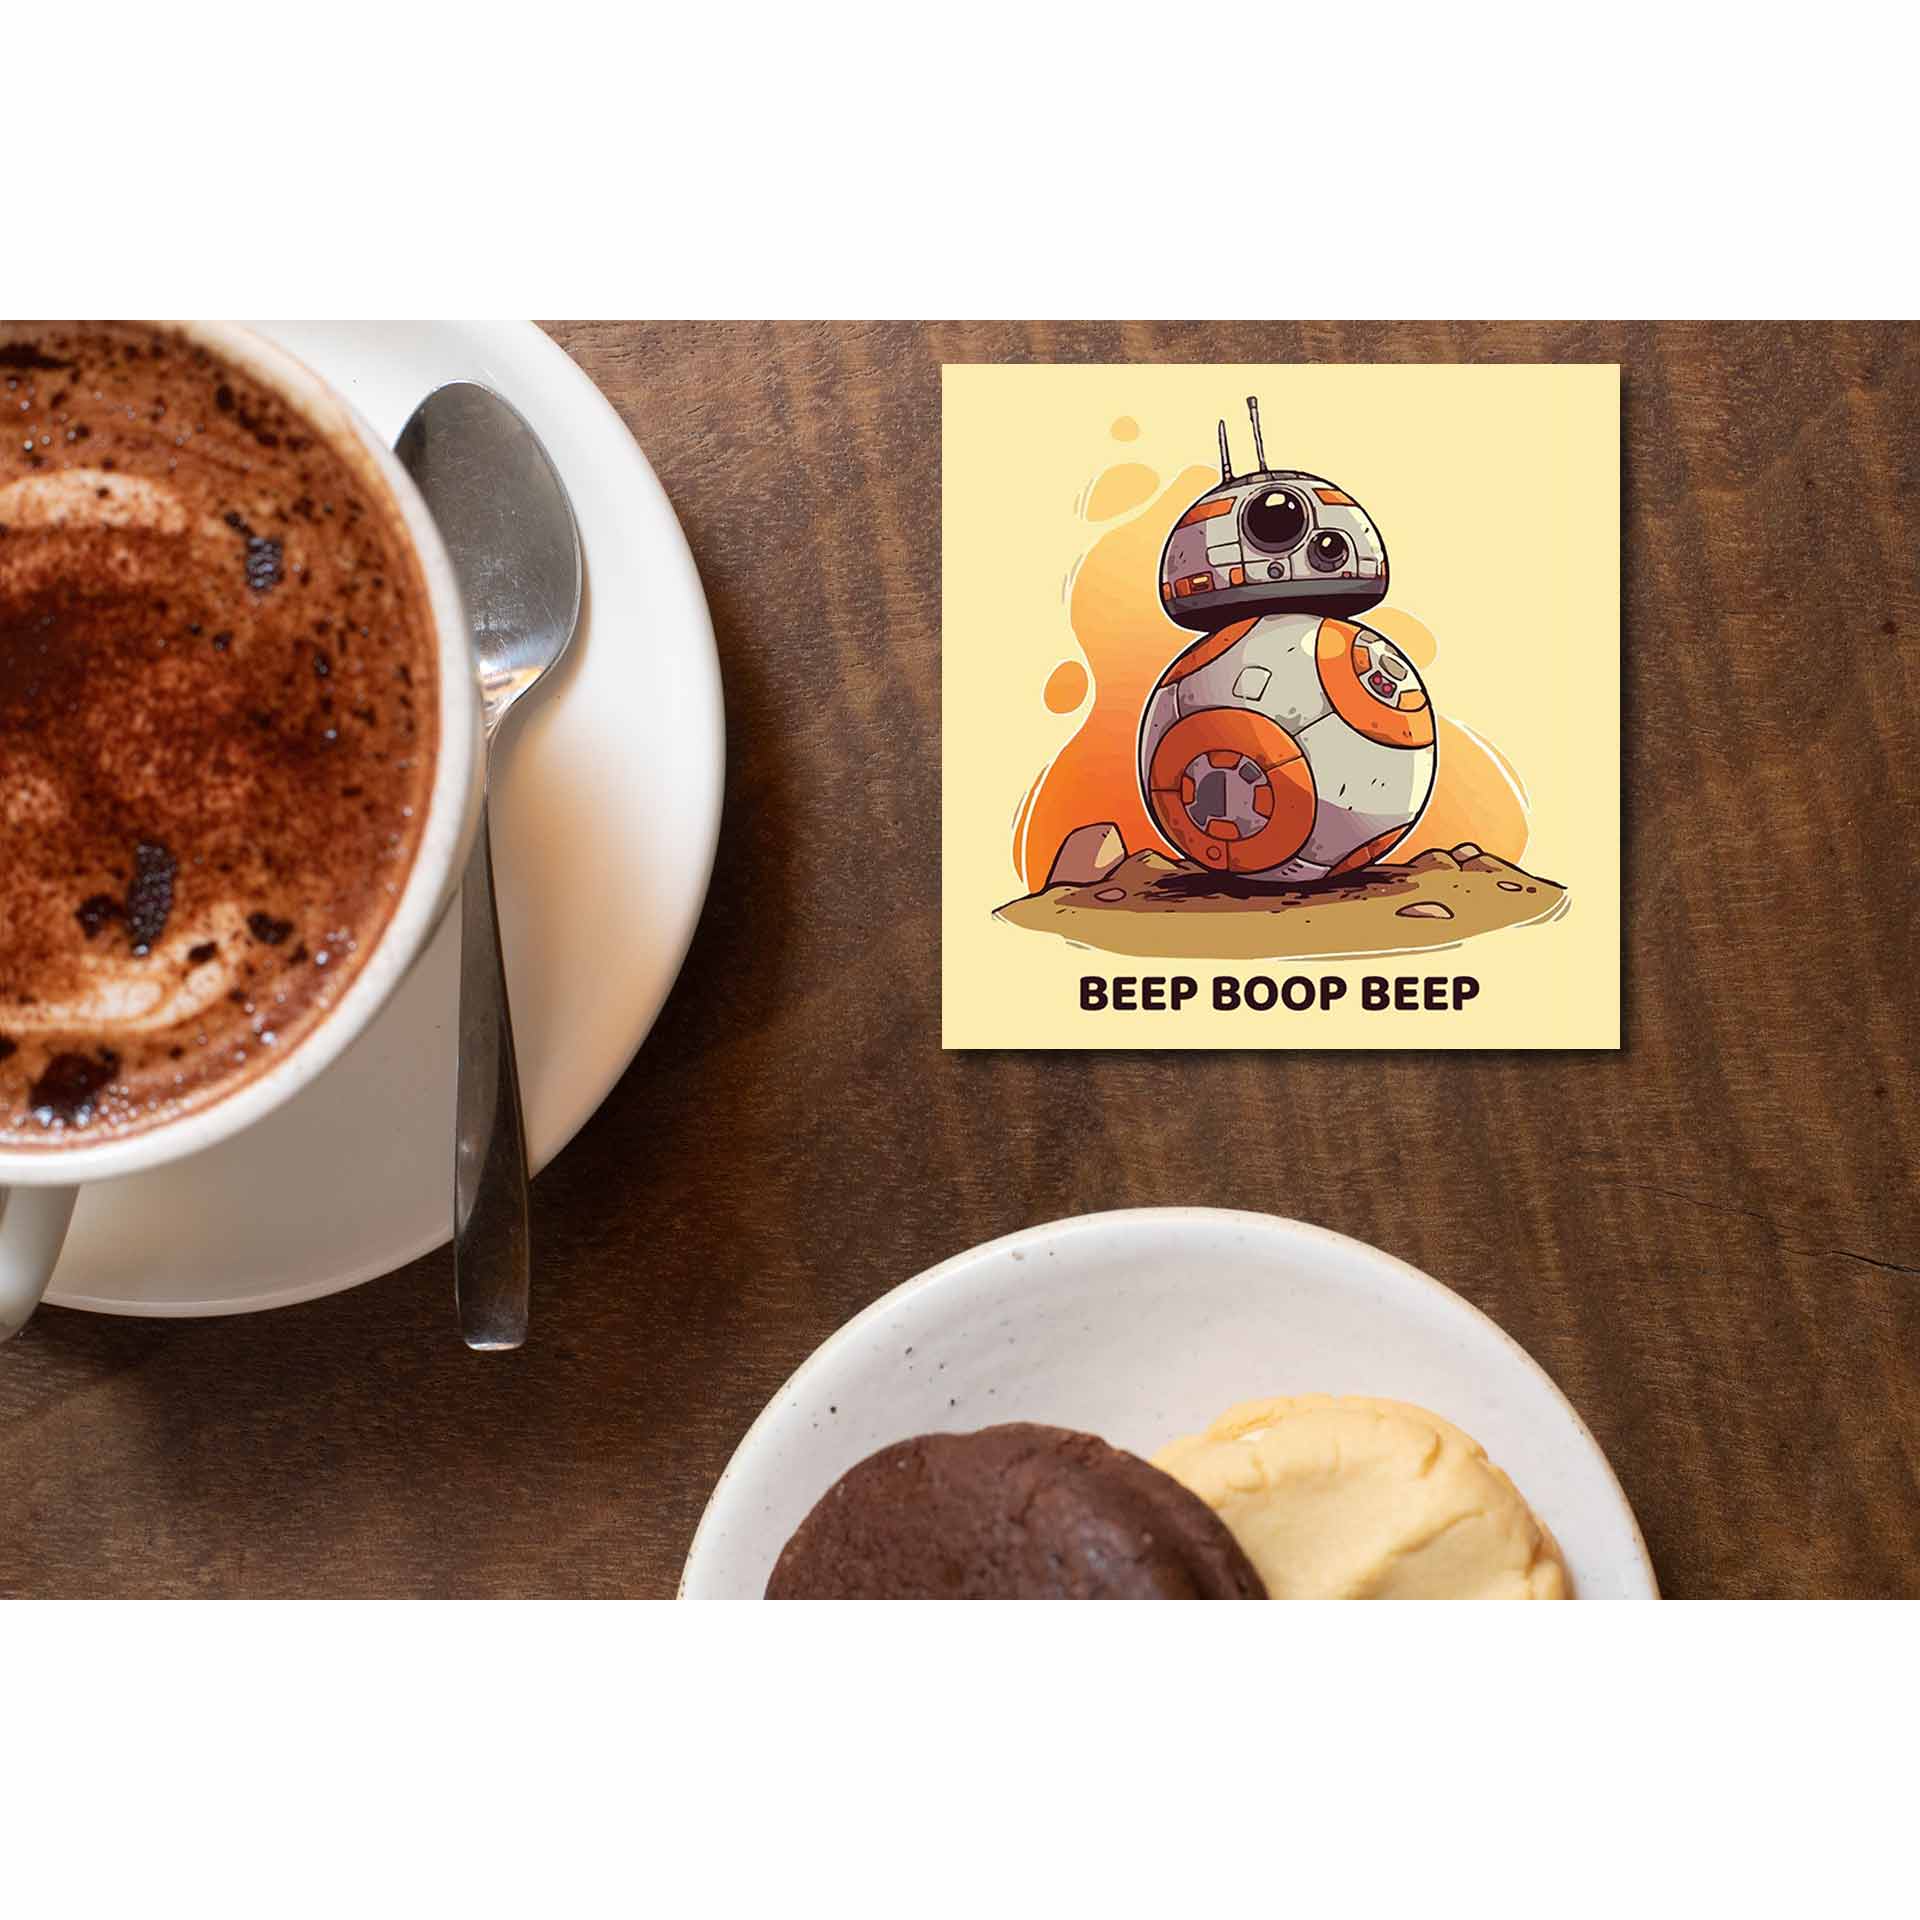 star wars bb-8 coasters wooden table cups indian tv & movies buy online india the banyan tee tbt men women girls boys unisex